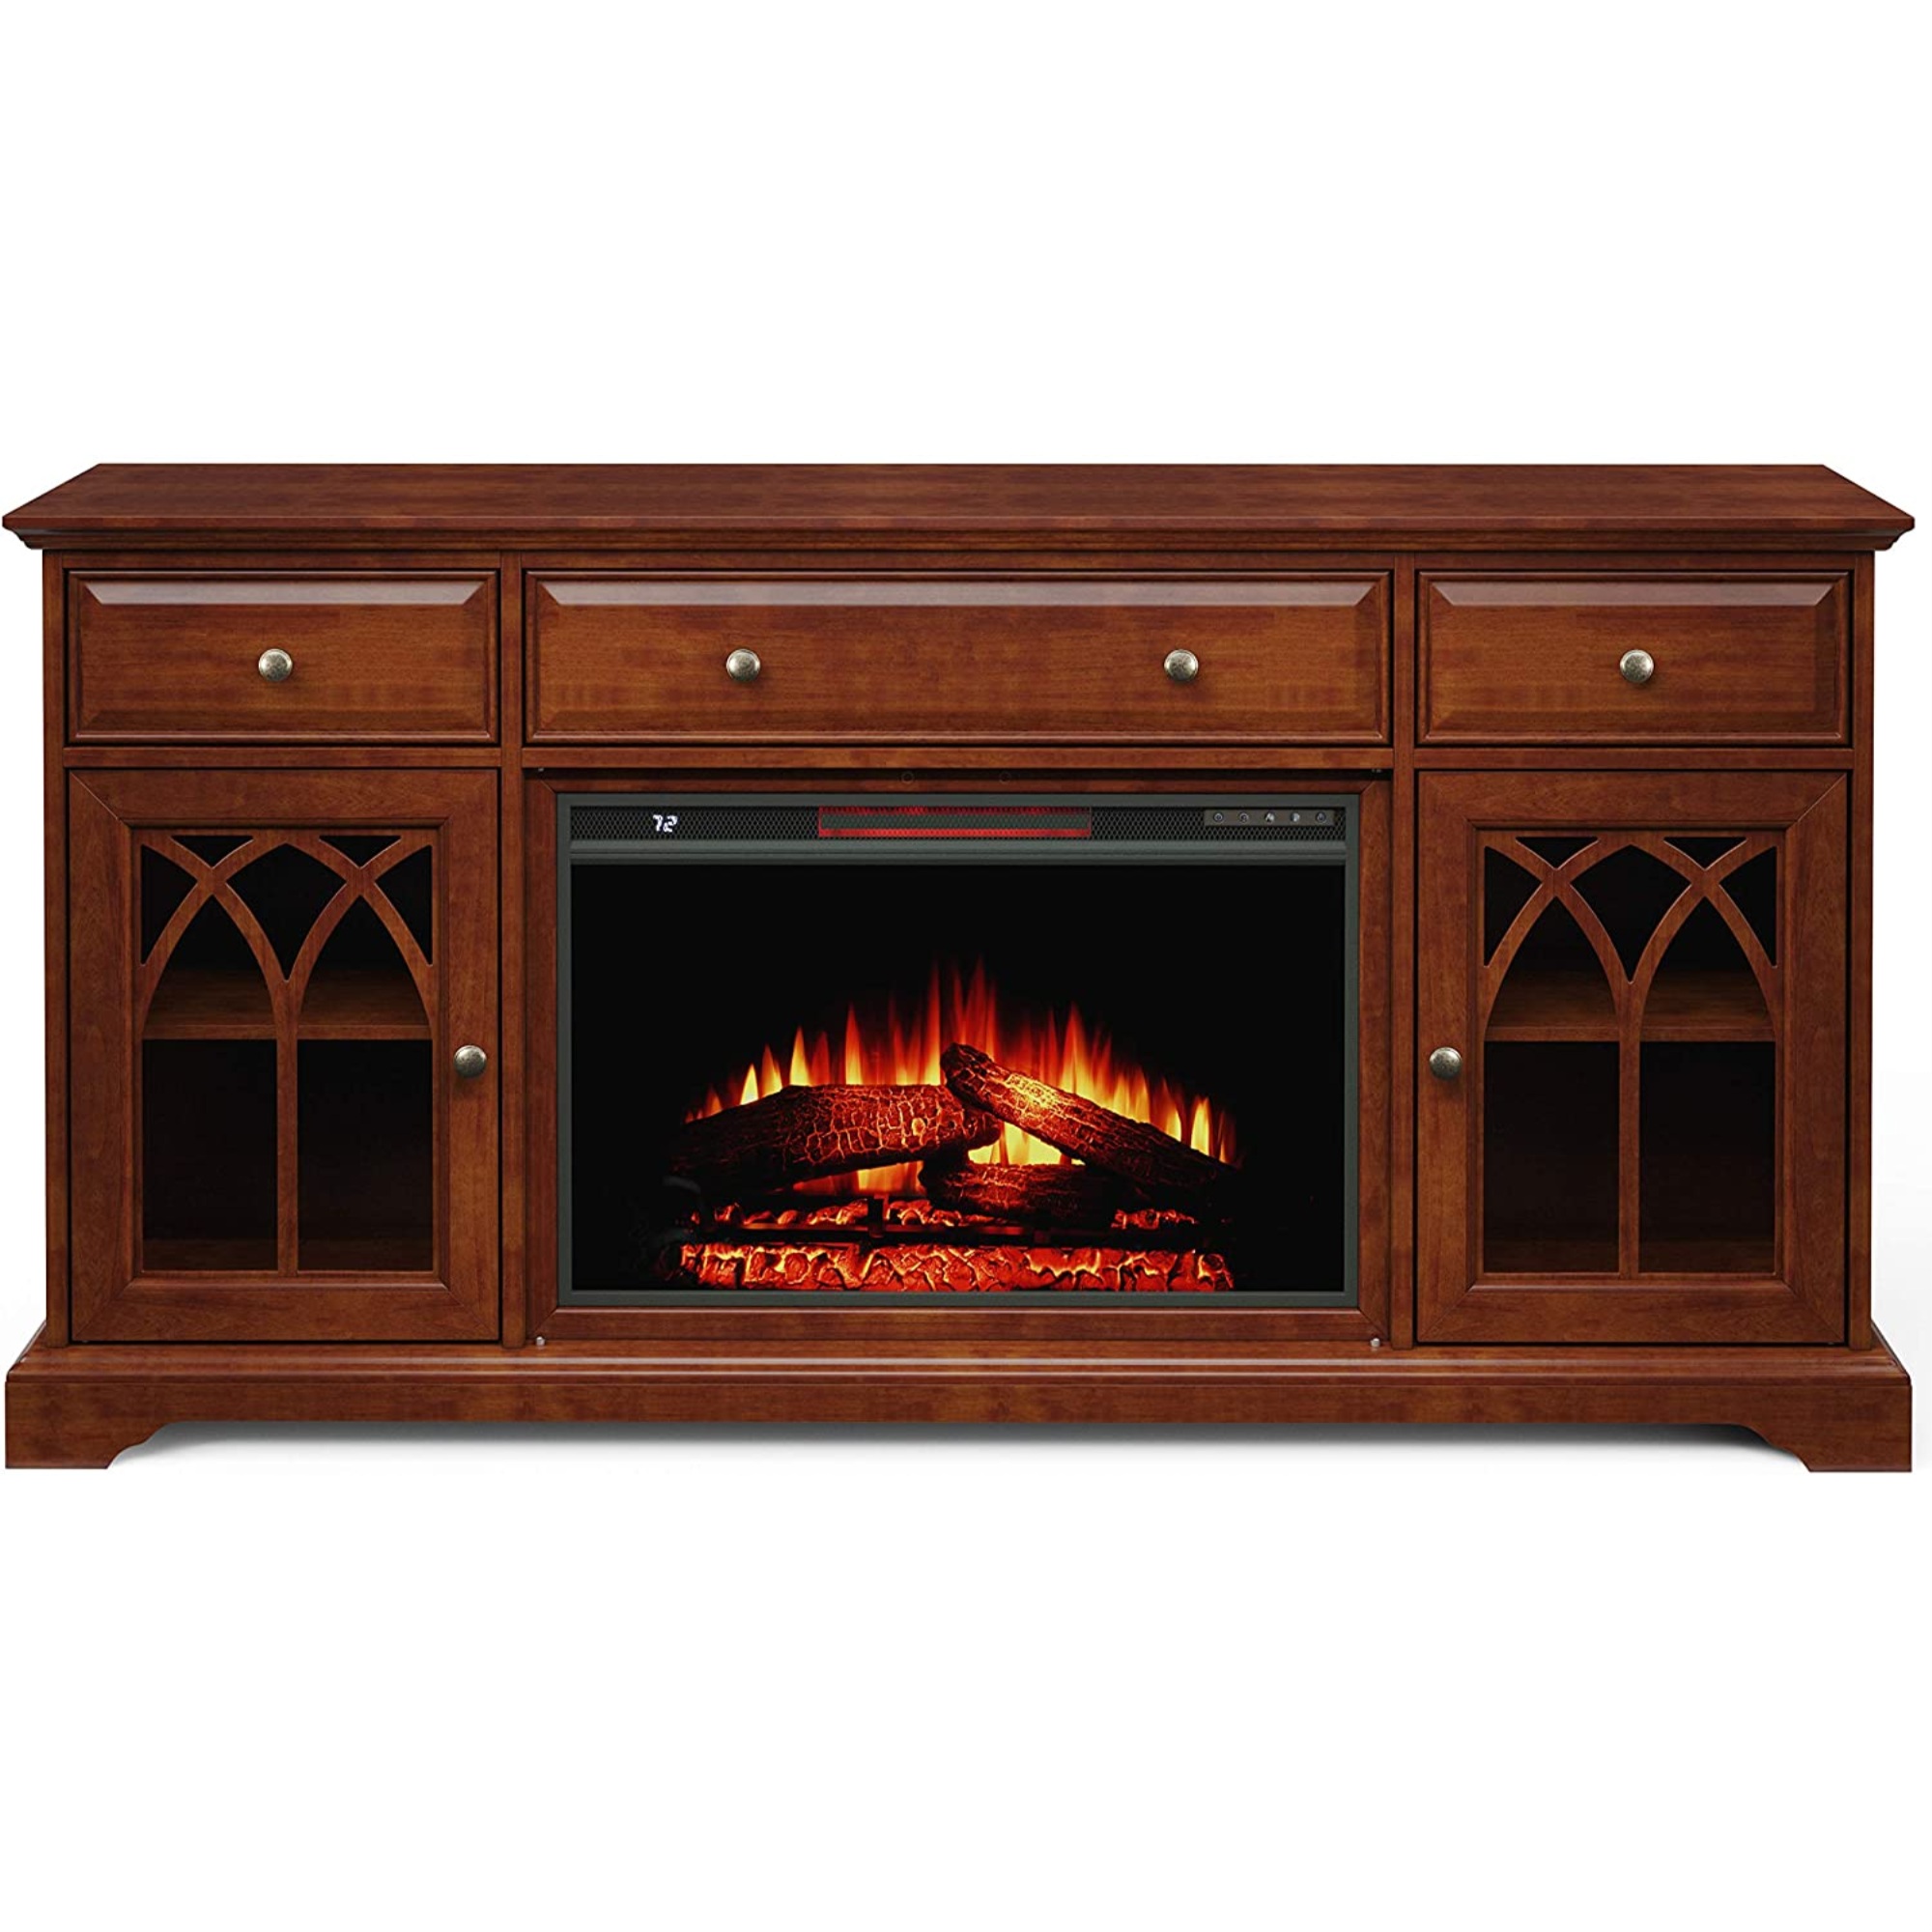 Jofran 32 Gothic Arch Tv Stand With, Chimney Free Electric Fireplace Tv Stand